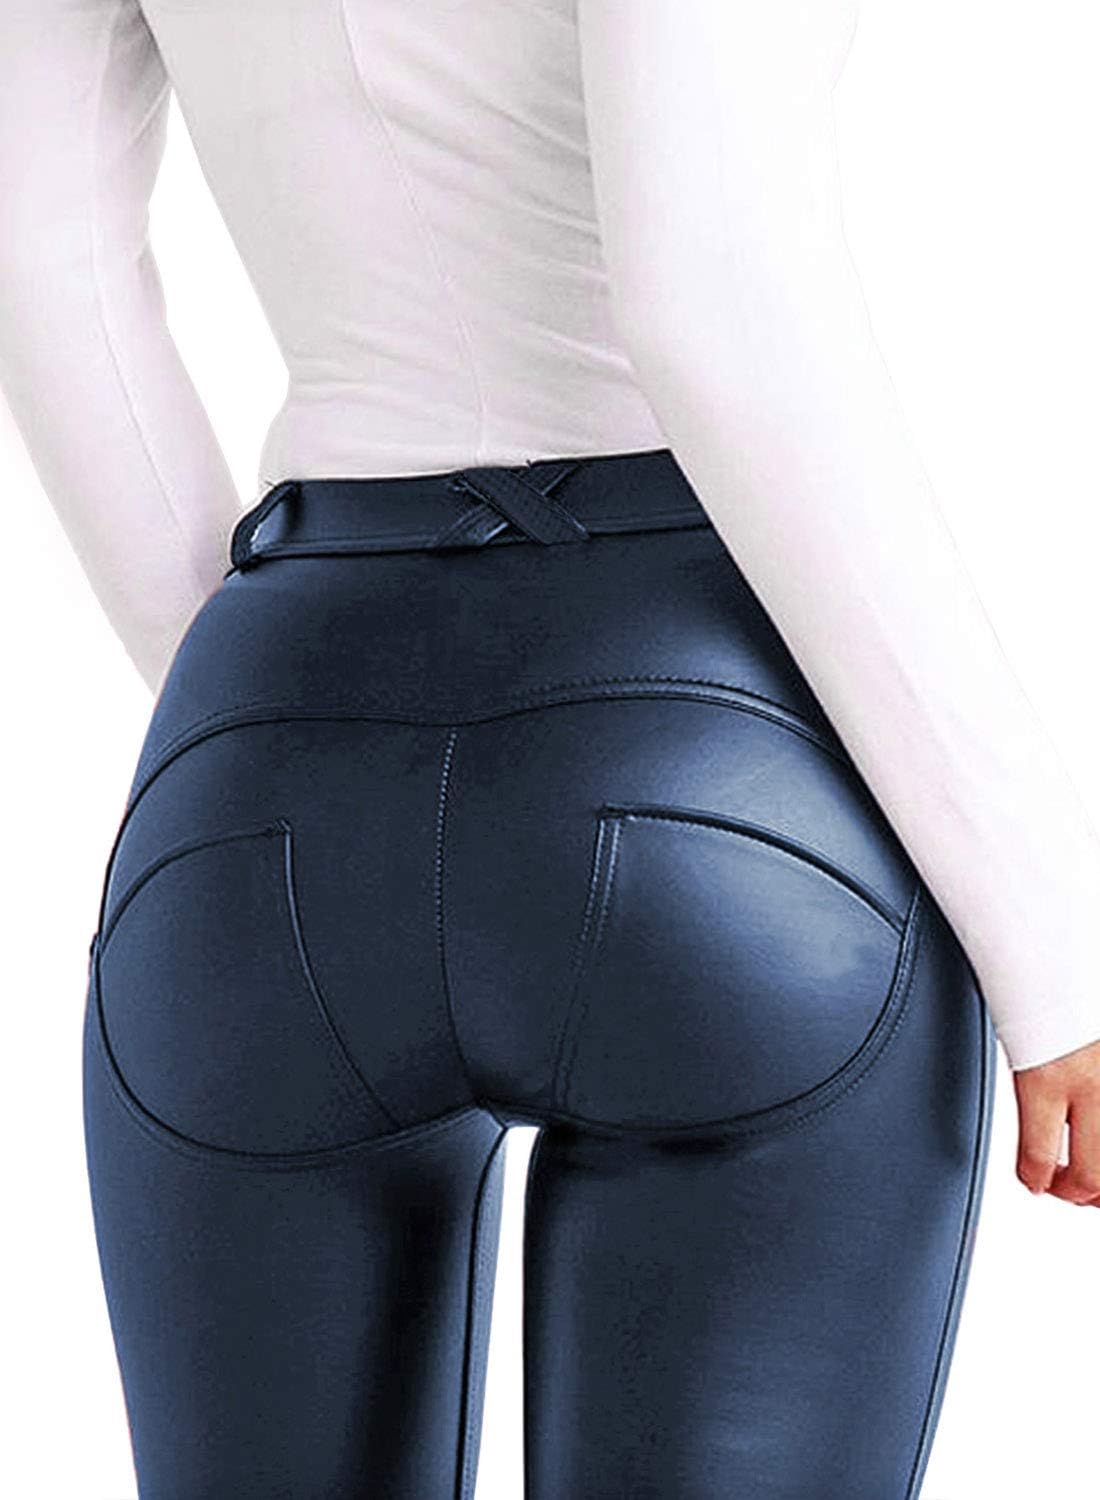 FITTOO Fleece Lined Leather Pants for Women Faux Leather Leggings Butt Lifting Black Sexy High Waisted Wet Look Tights